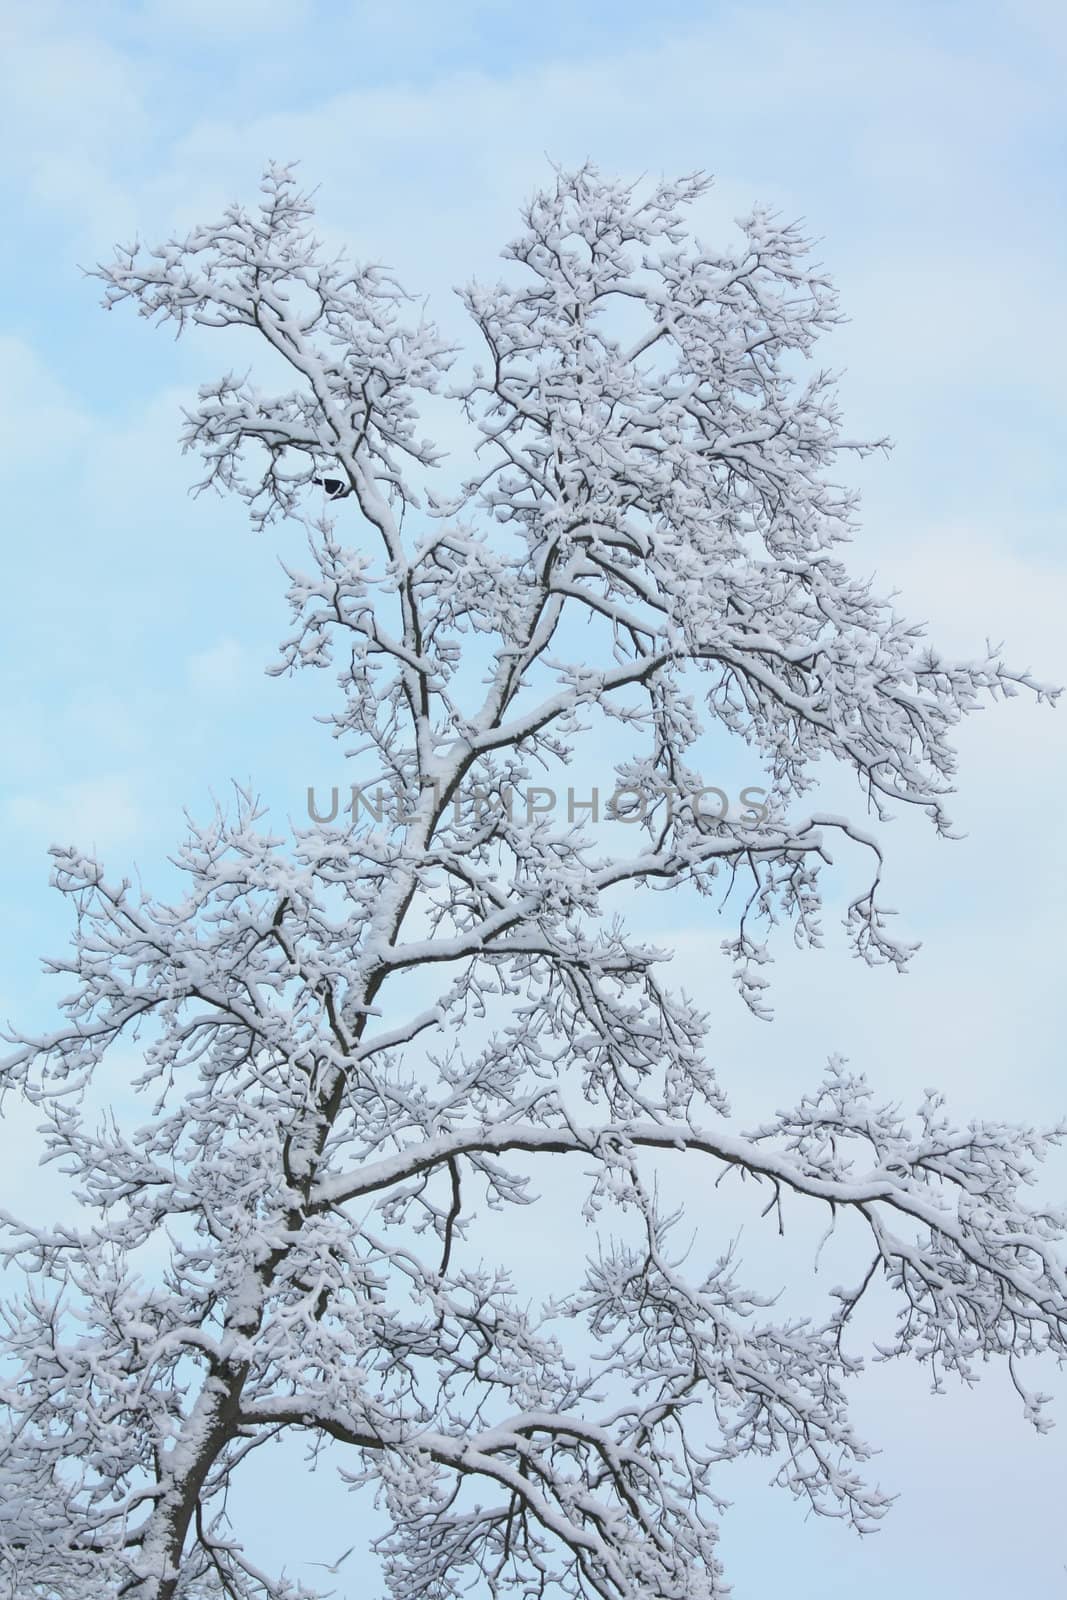 A tree covered with frosted snow agains a soft blue sky